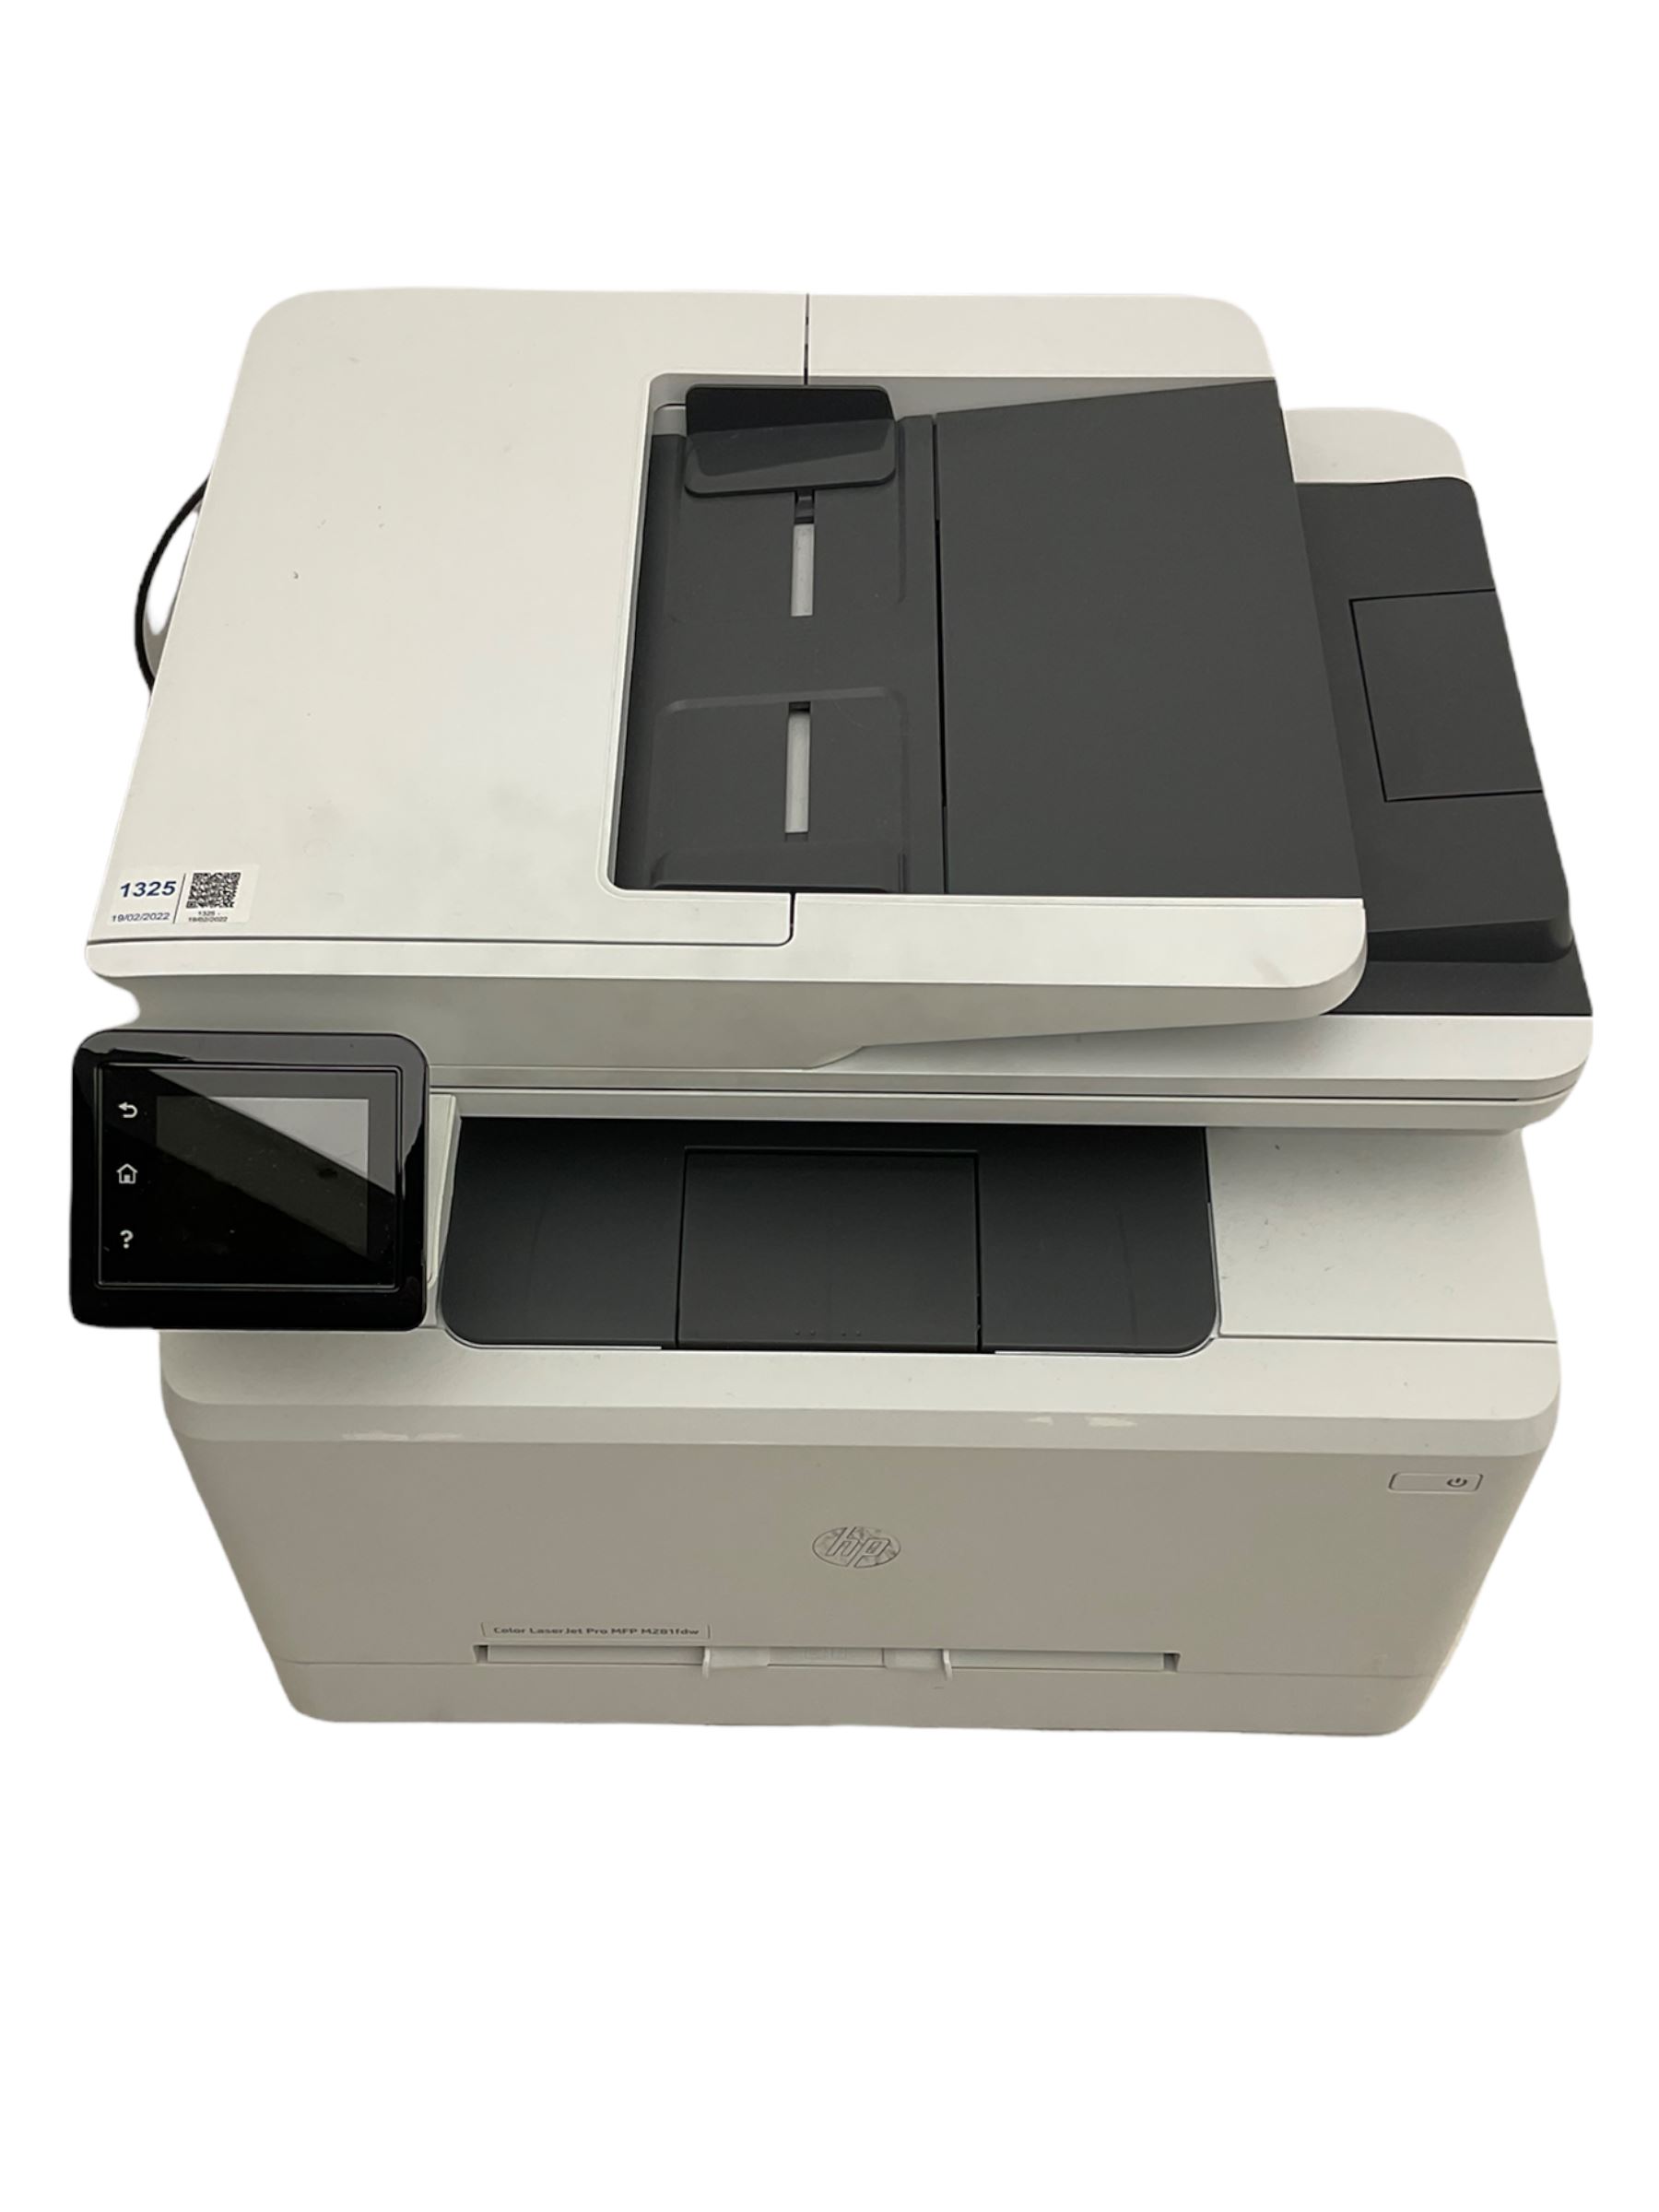 HP Color Laser Jet Pro MFP M281 T6B82A all-in-one printer - Image 2 of 6